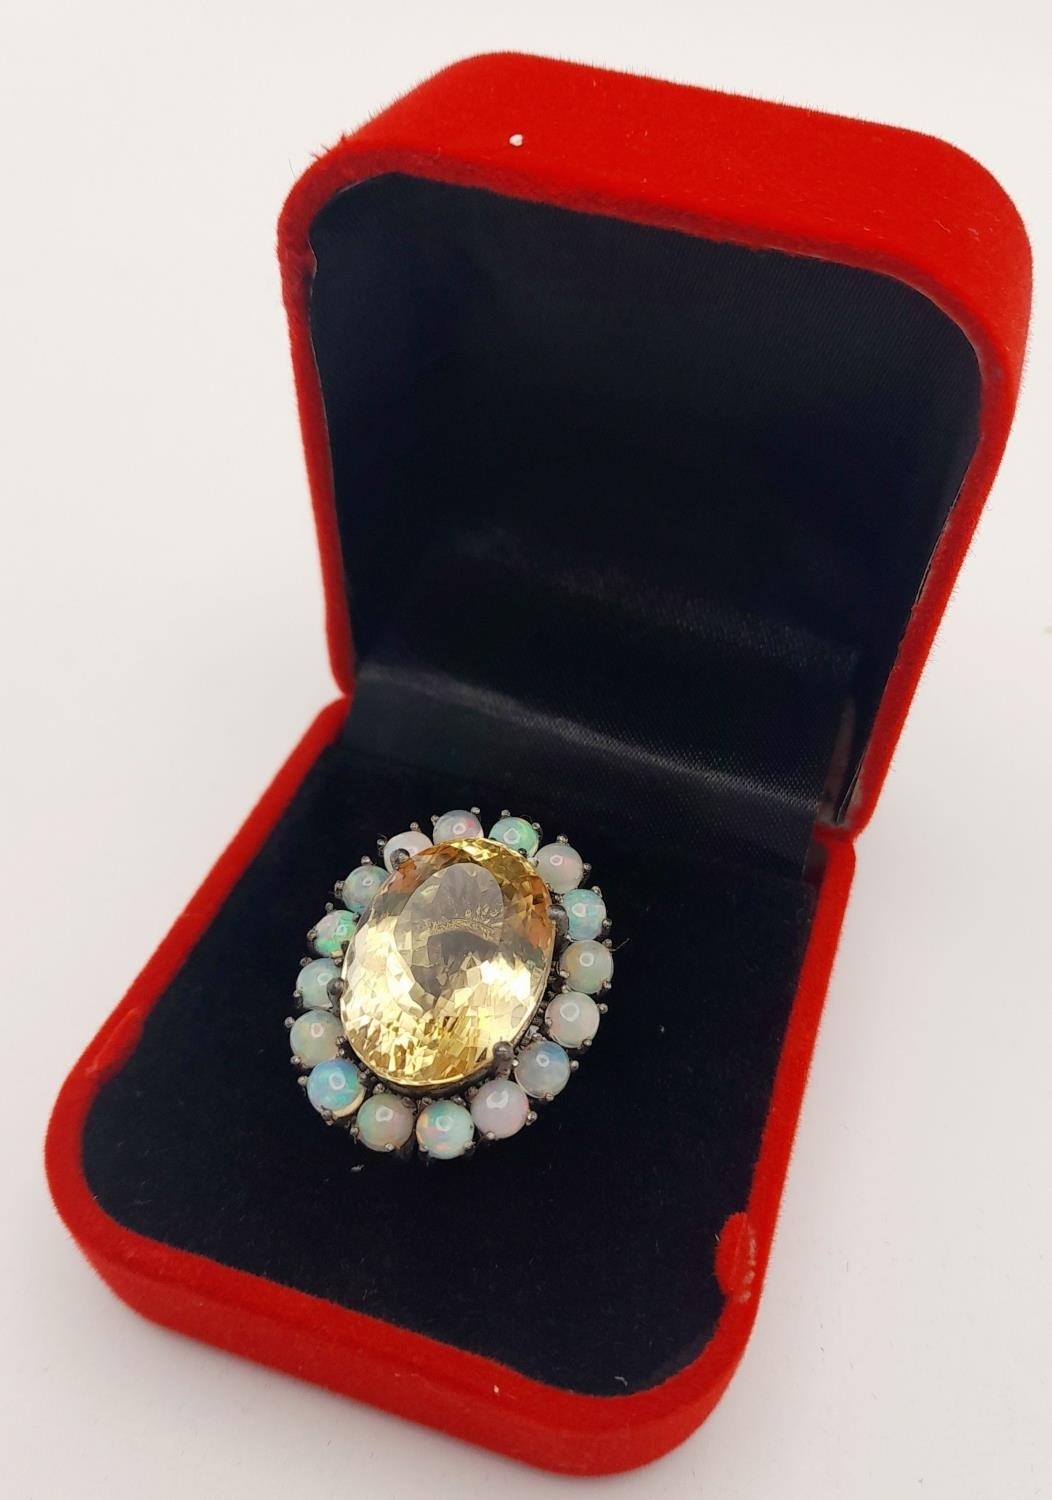 A Citrine and Ethiopian Fire Opal Ring. Set in 925 Sterling Silver. W-12g. Large citrine with an - Image 4 of 5